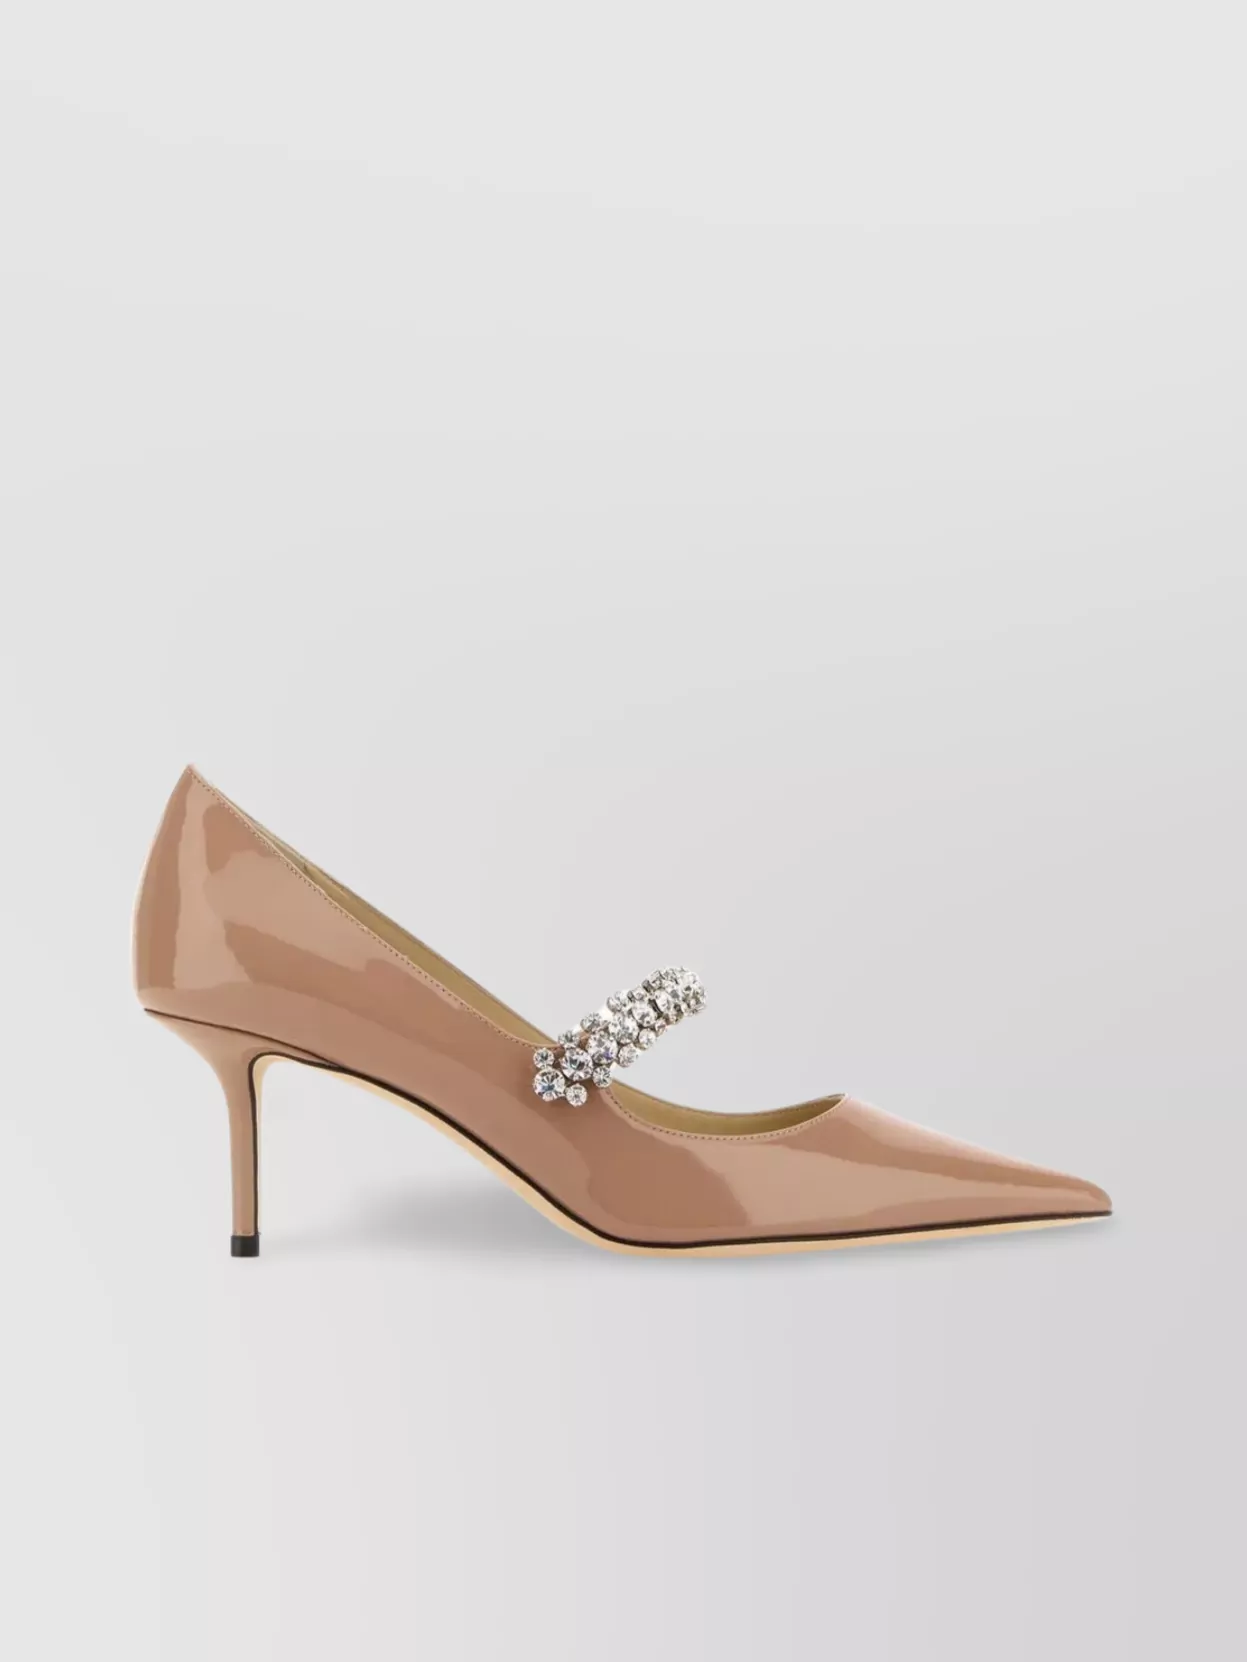 Shop Jimmy Choo Bing 65 Leather Pumps With Pointed Toe And Stiletto Heel In Cream